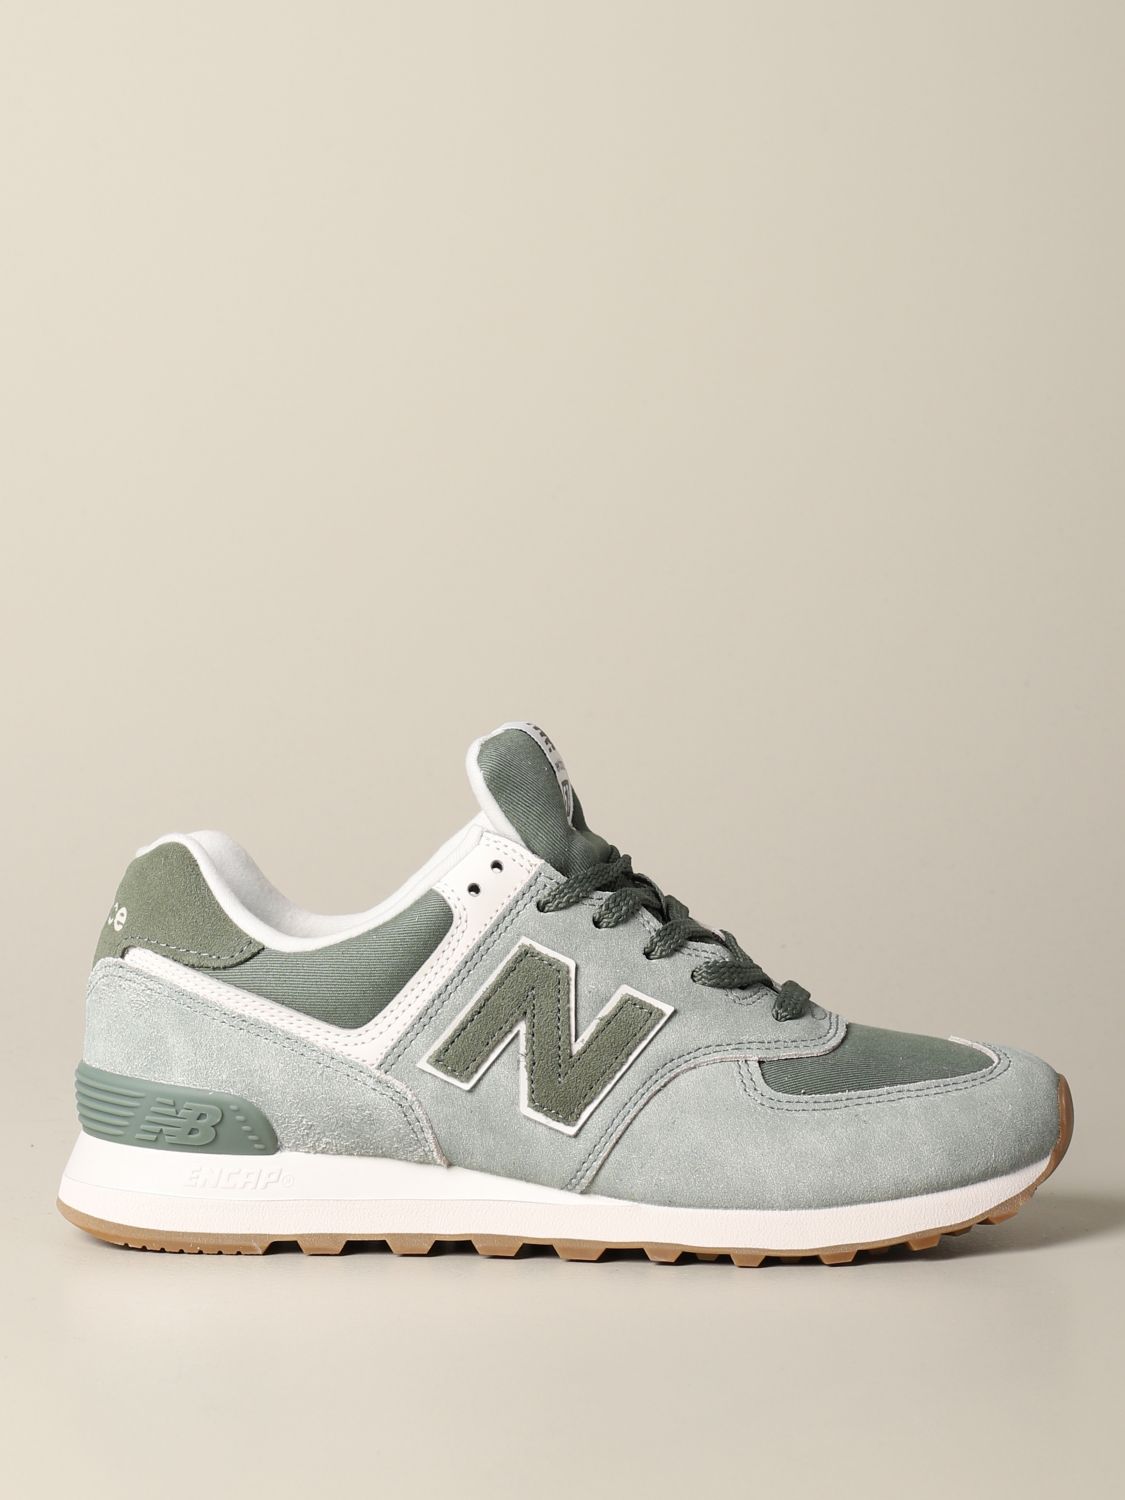 new balance homme militaire